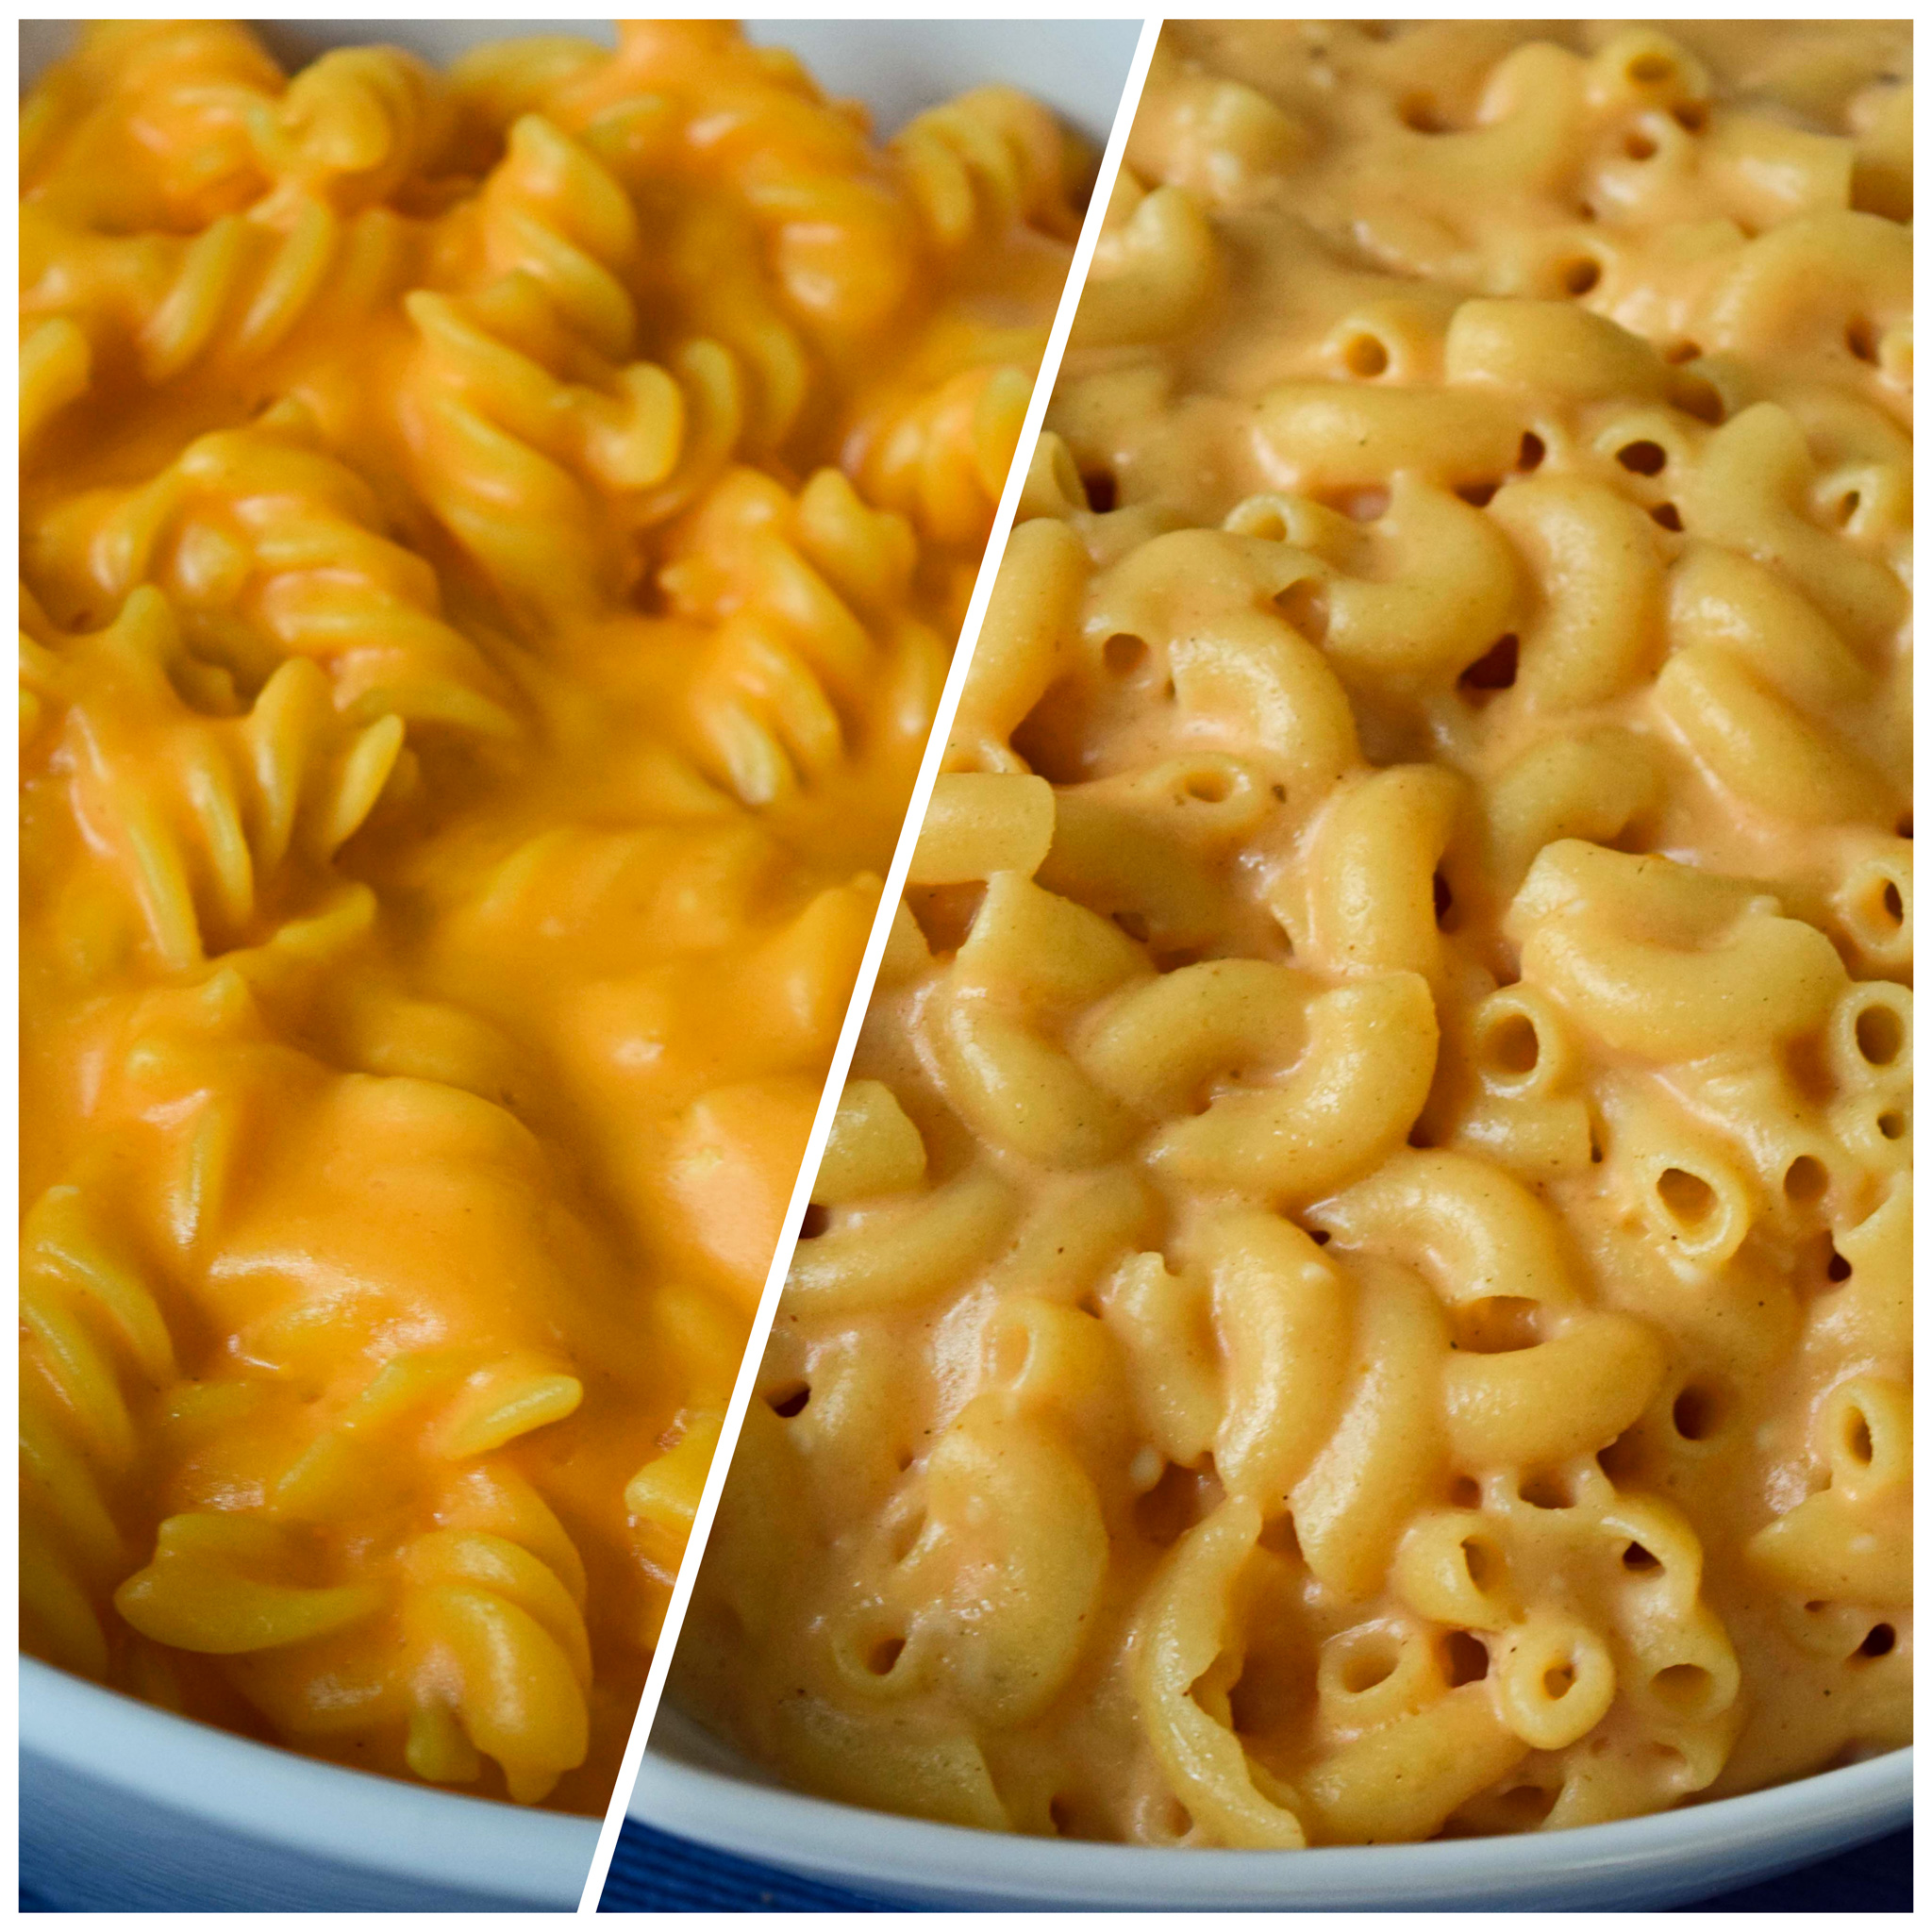 Two Types of Gluten Free Macaroni and Cheese